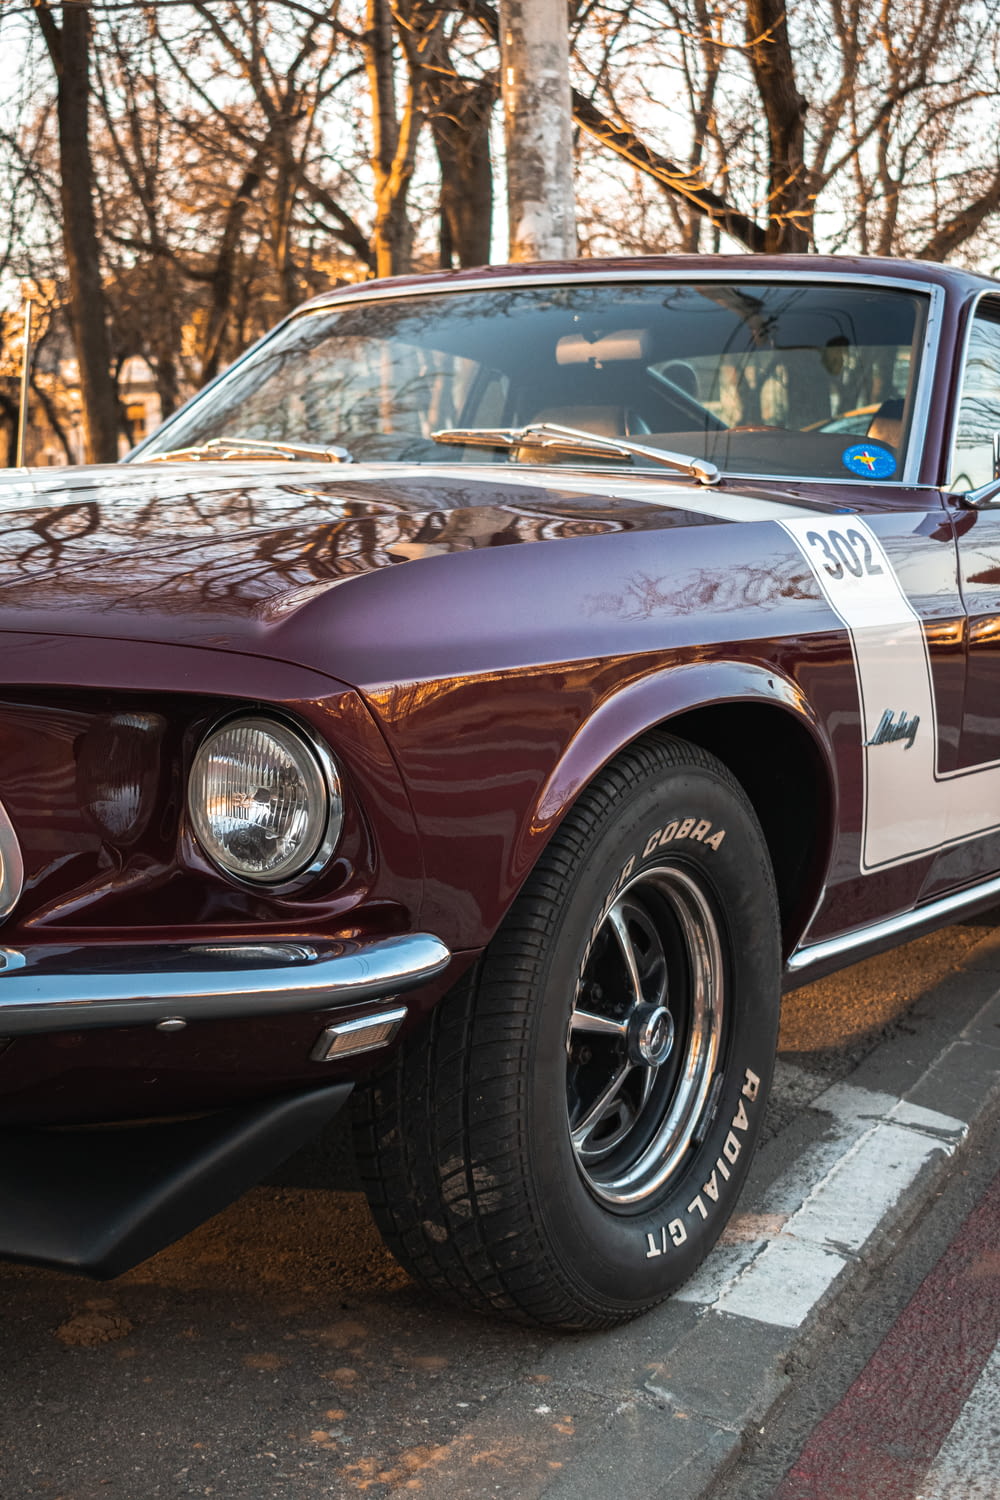 a maroon mustang mustang sitting on the side of the road